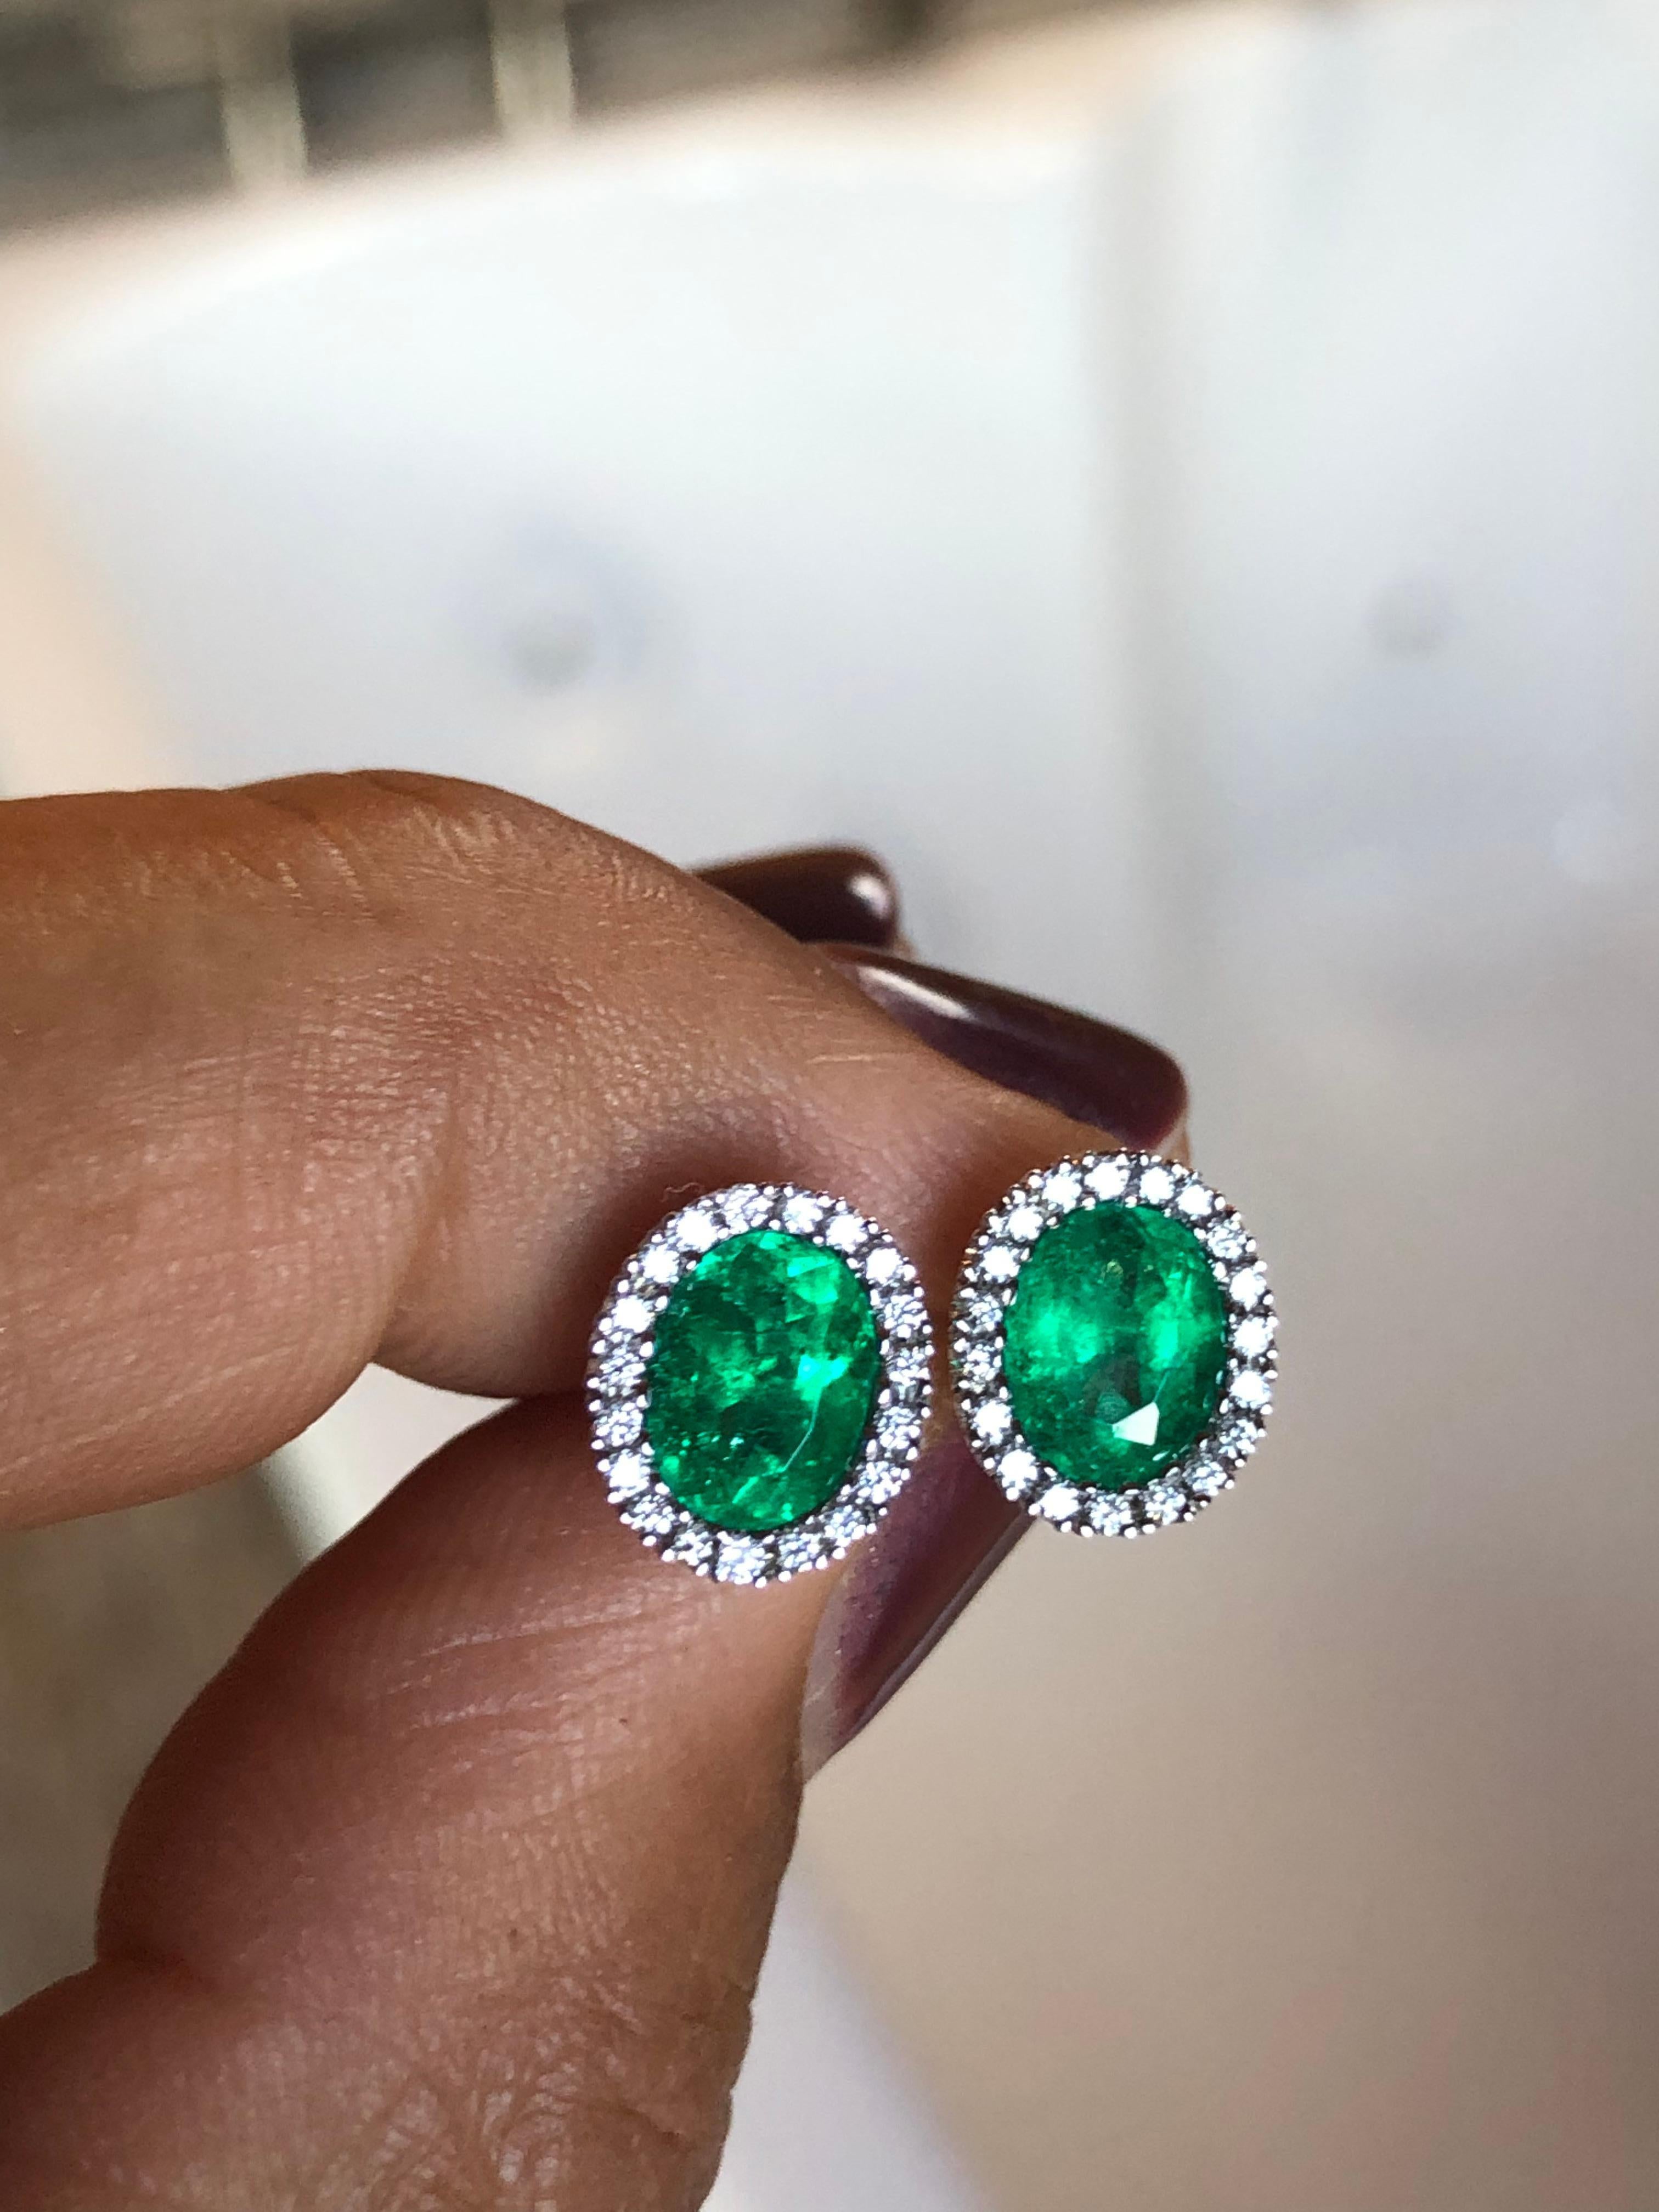 A stunning pair of 1.90 carats, AAA+ vivid green color, lustrous, transparent fine natural Colombian Emerald earrings with a diamond halo surrounding it, all set in 18K White Gold.  
Stone: Colombian Emerald  Weight: 1.90 carats  
Shape: Oval  